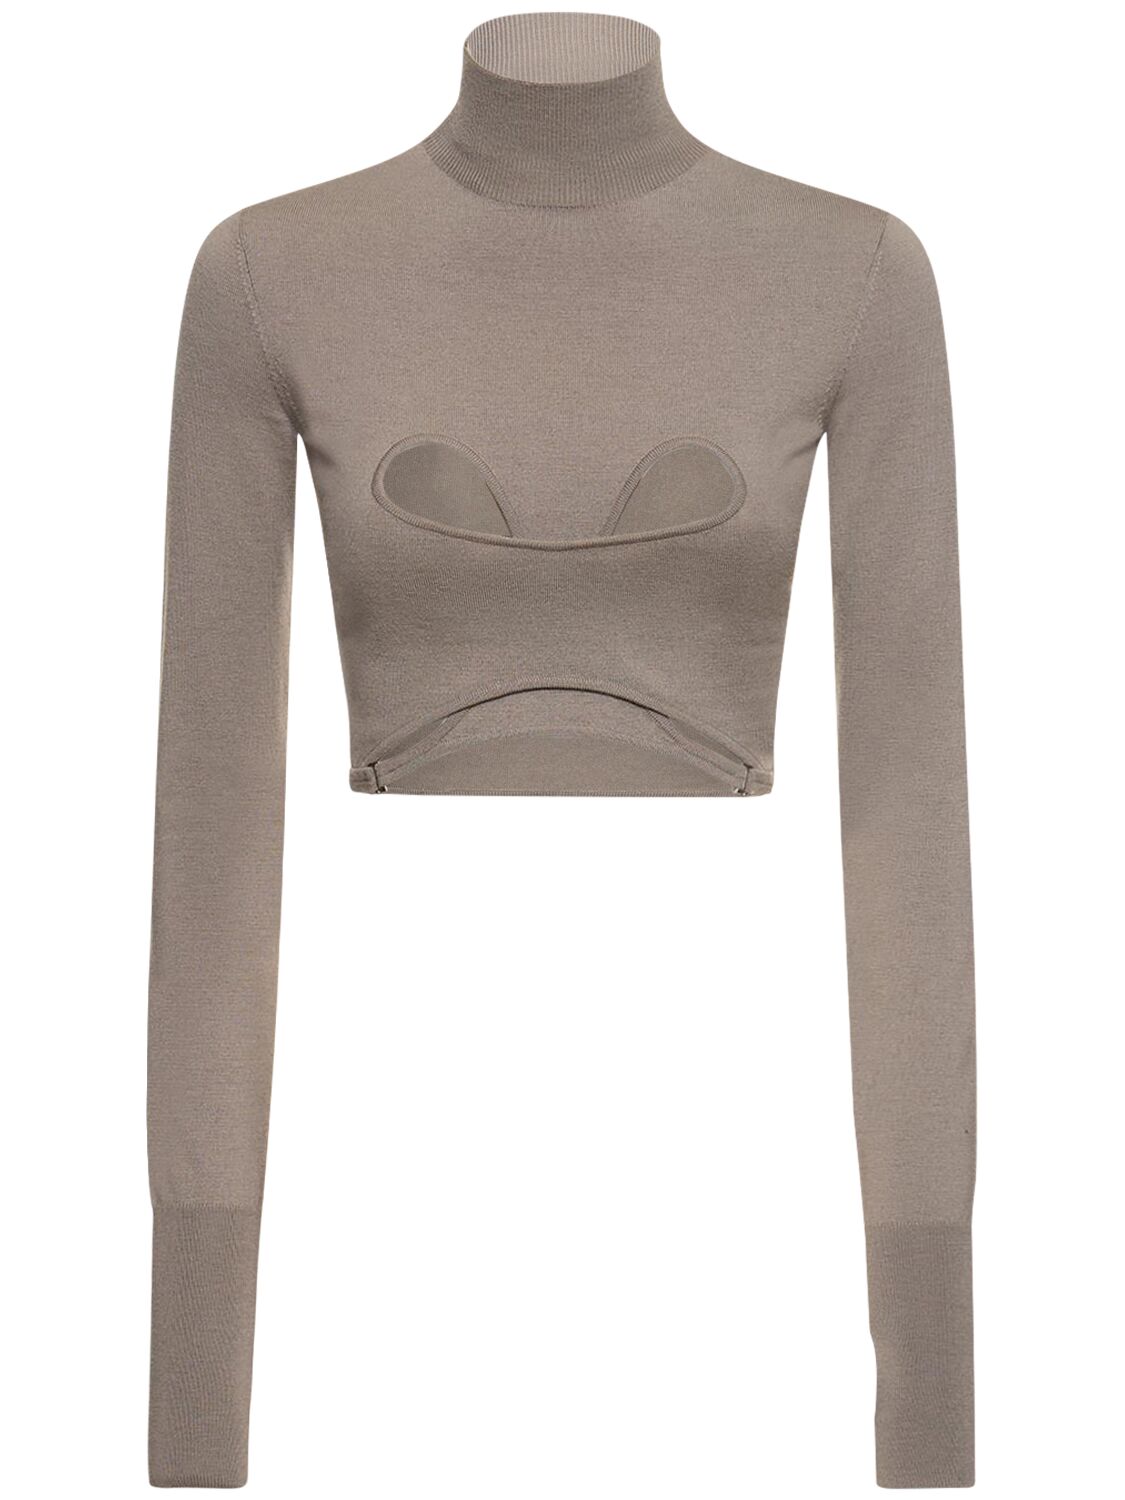 Image of Cutout Knit Turtleneck Cropped Top